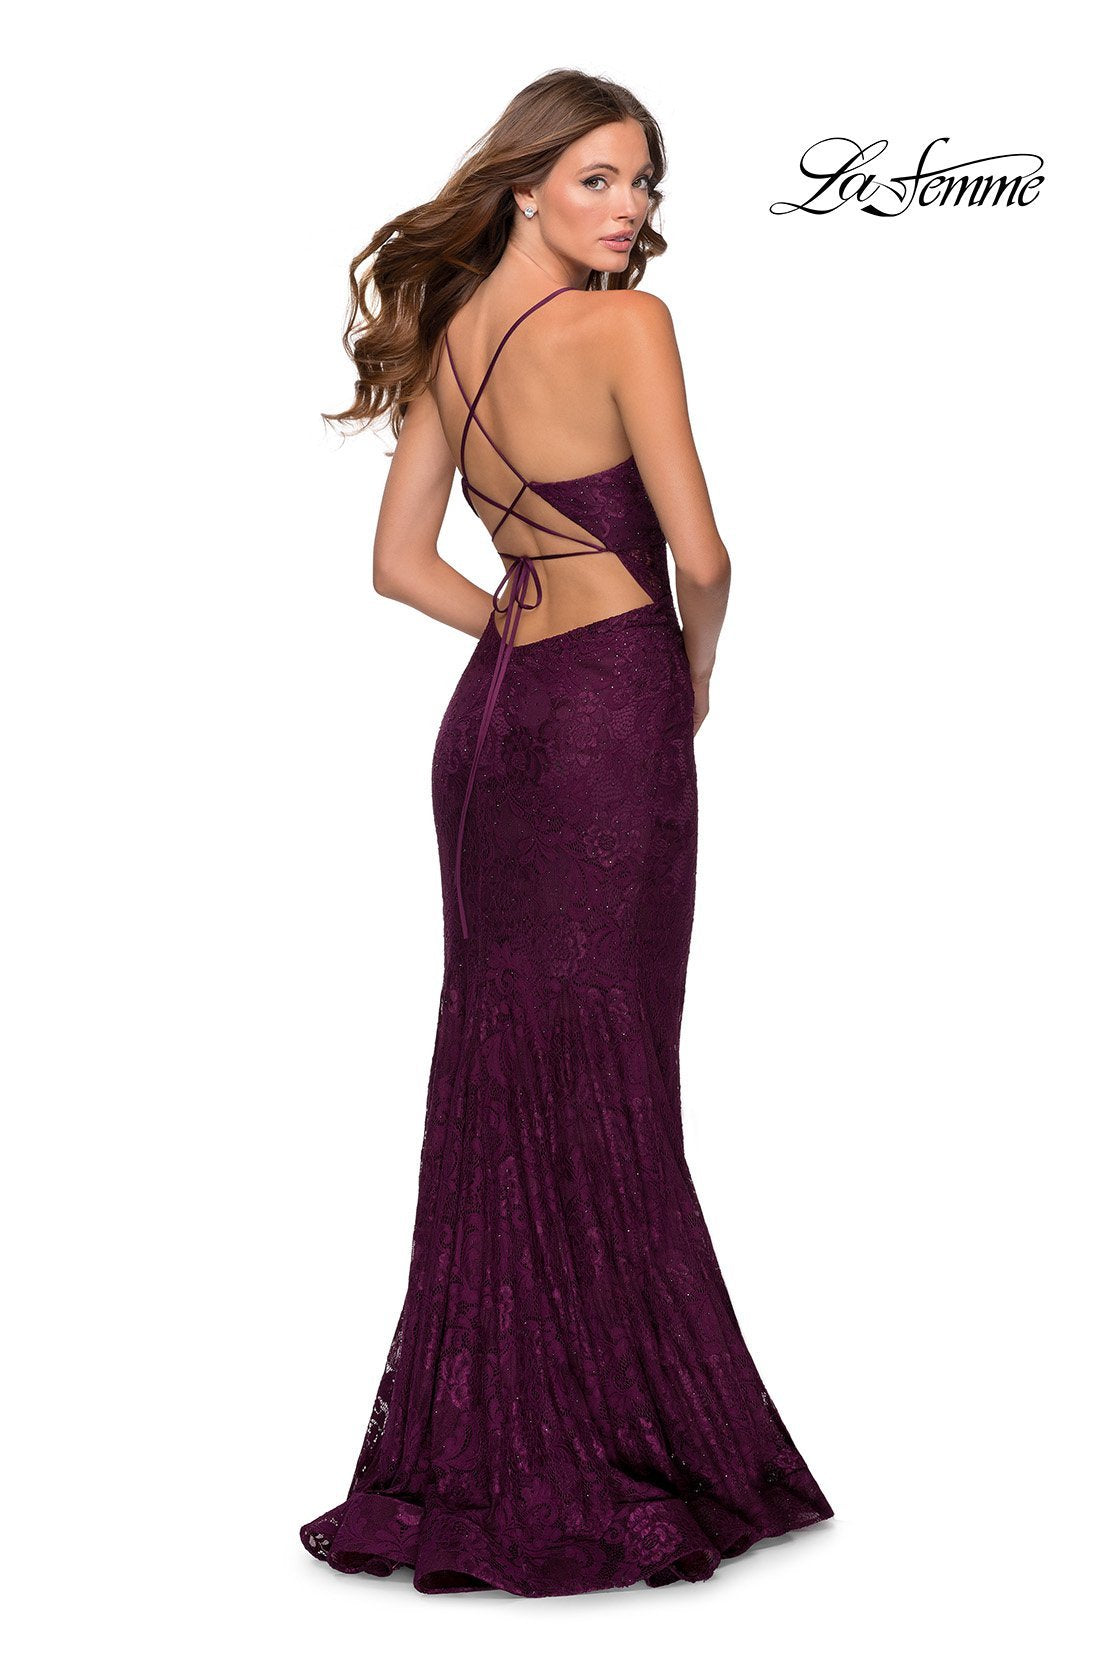 La Femme 28534 dress images in these colors: Dark Berry, Emerald, Navy.